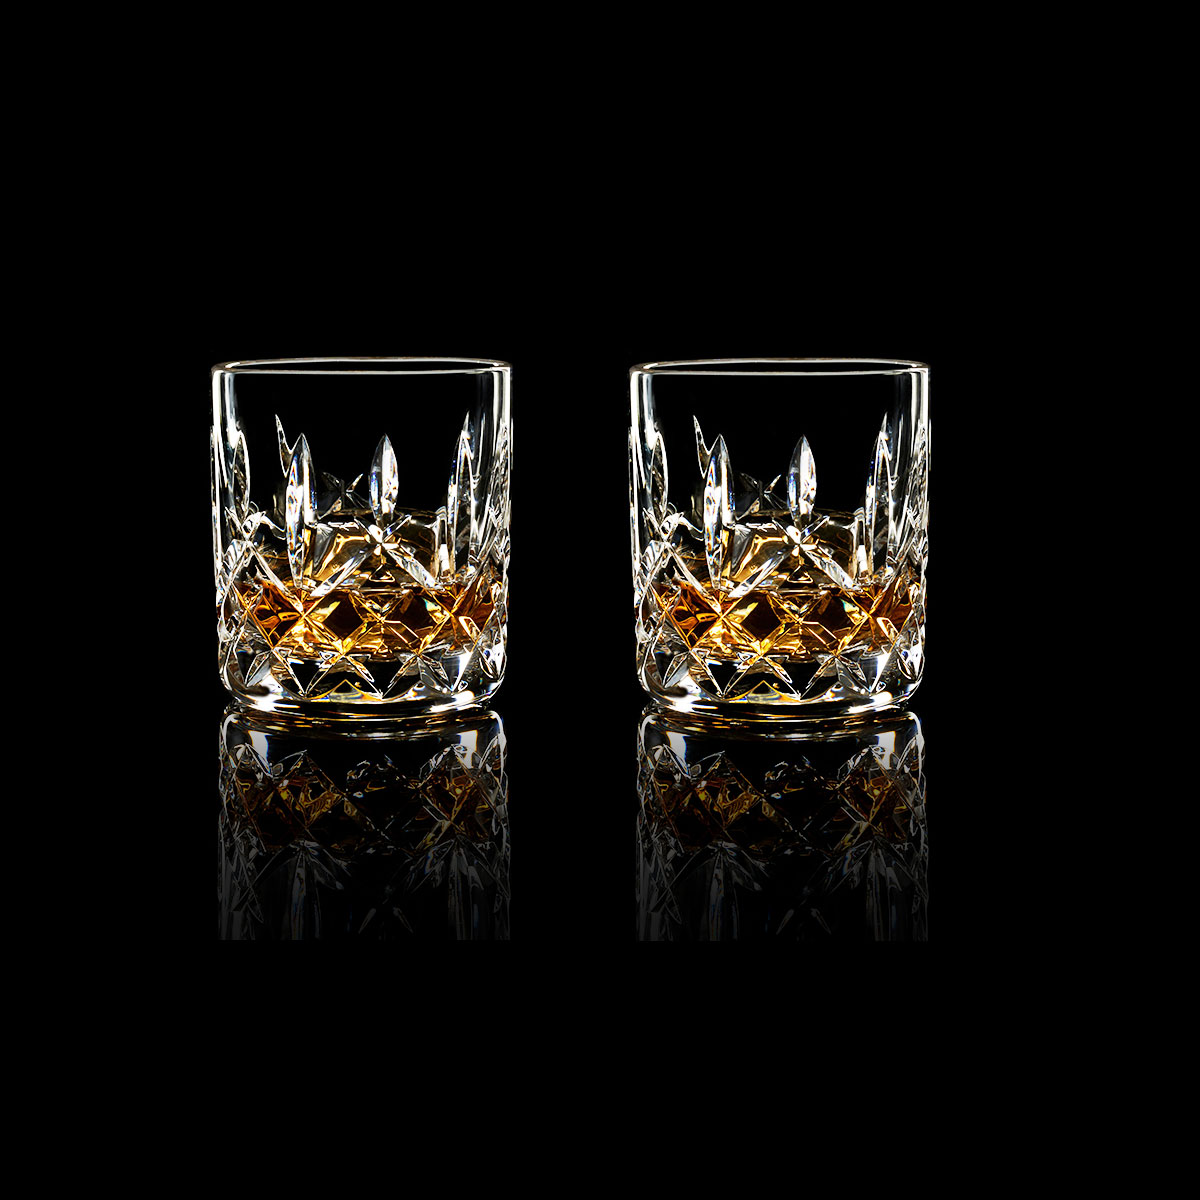 waterford lismore whiskey glasses